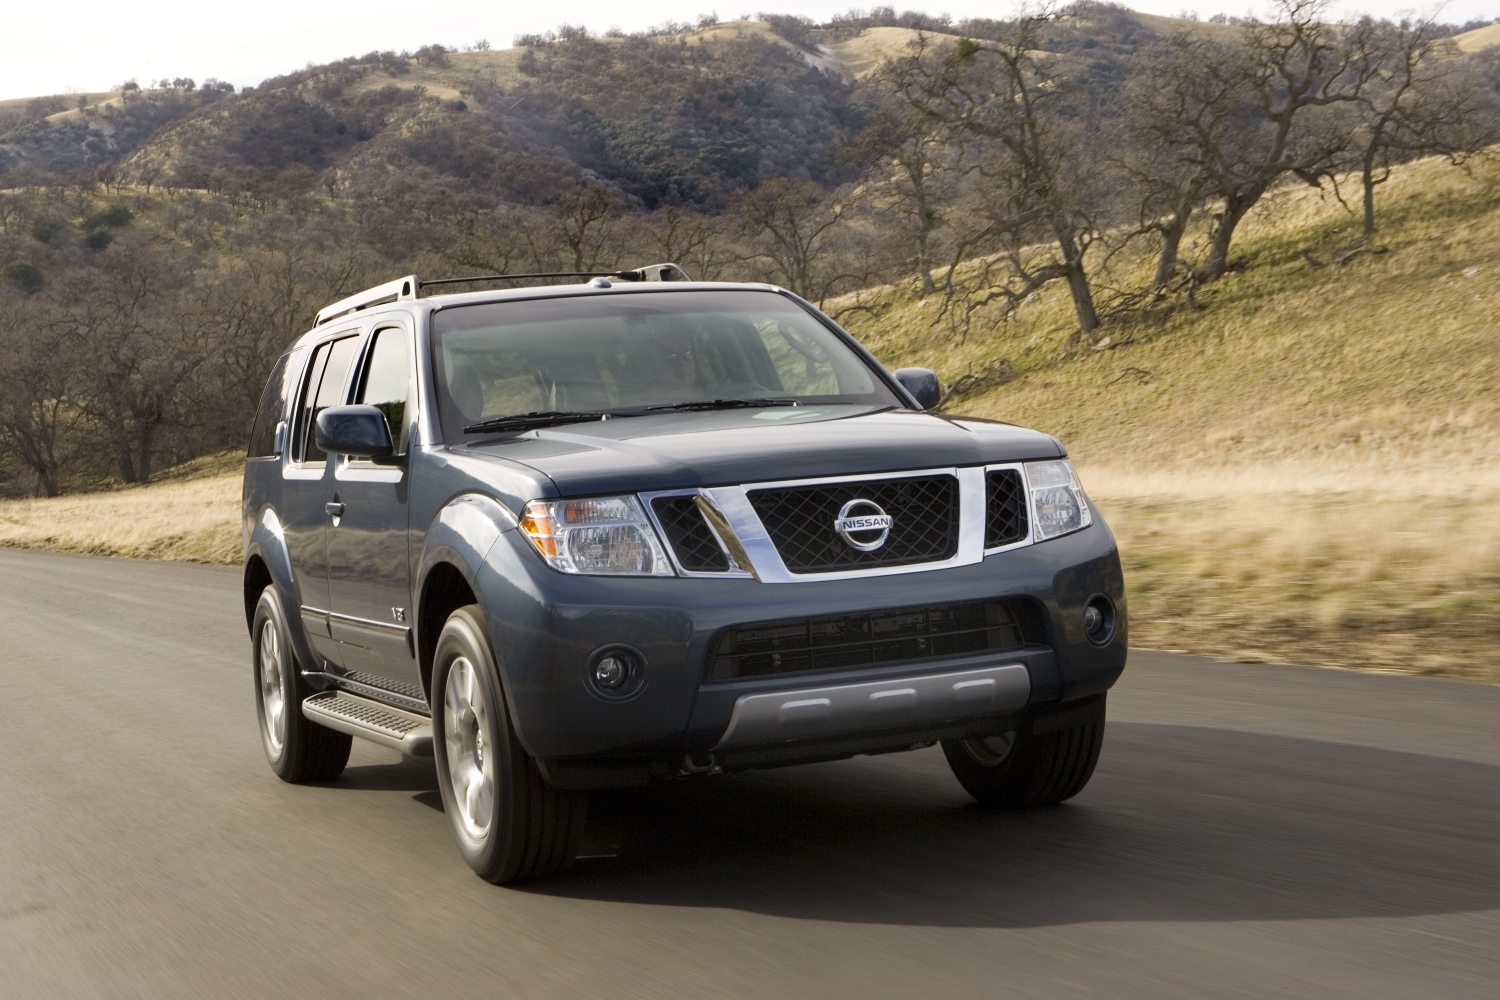 Affordable SUVs with three rows like this Nissan Pathfinder